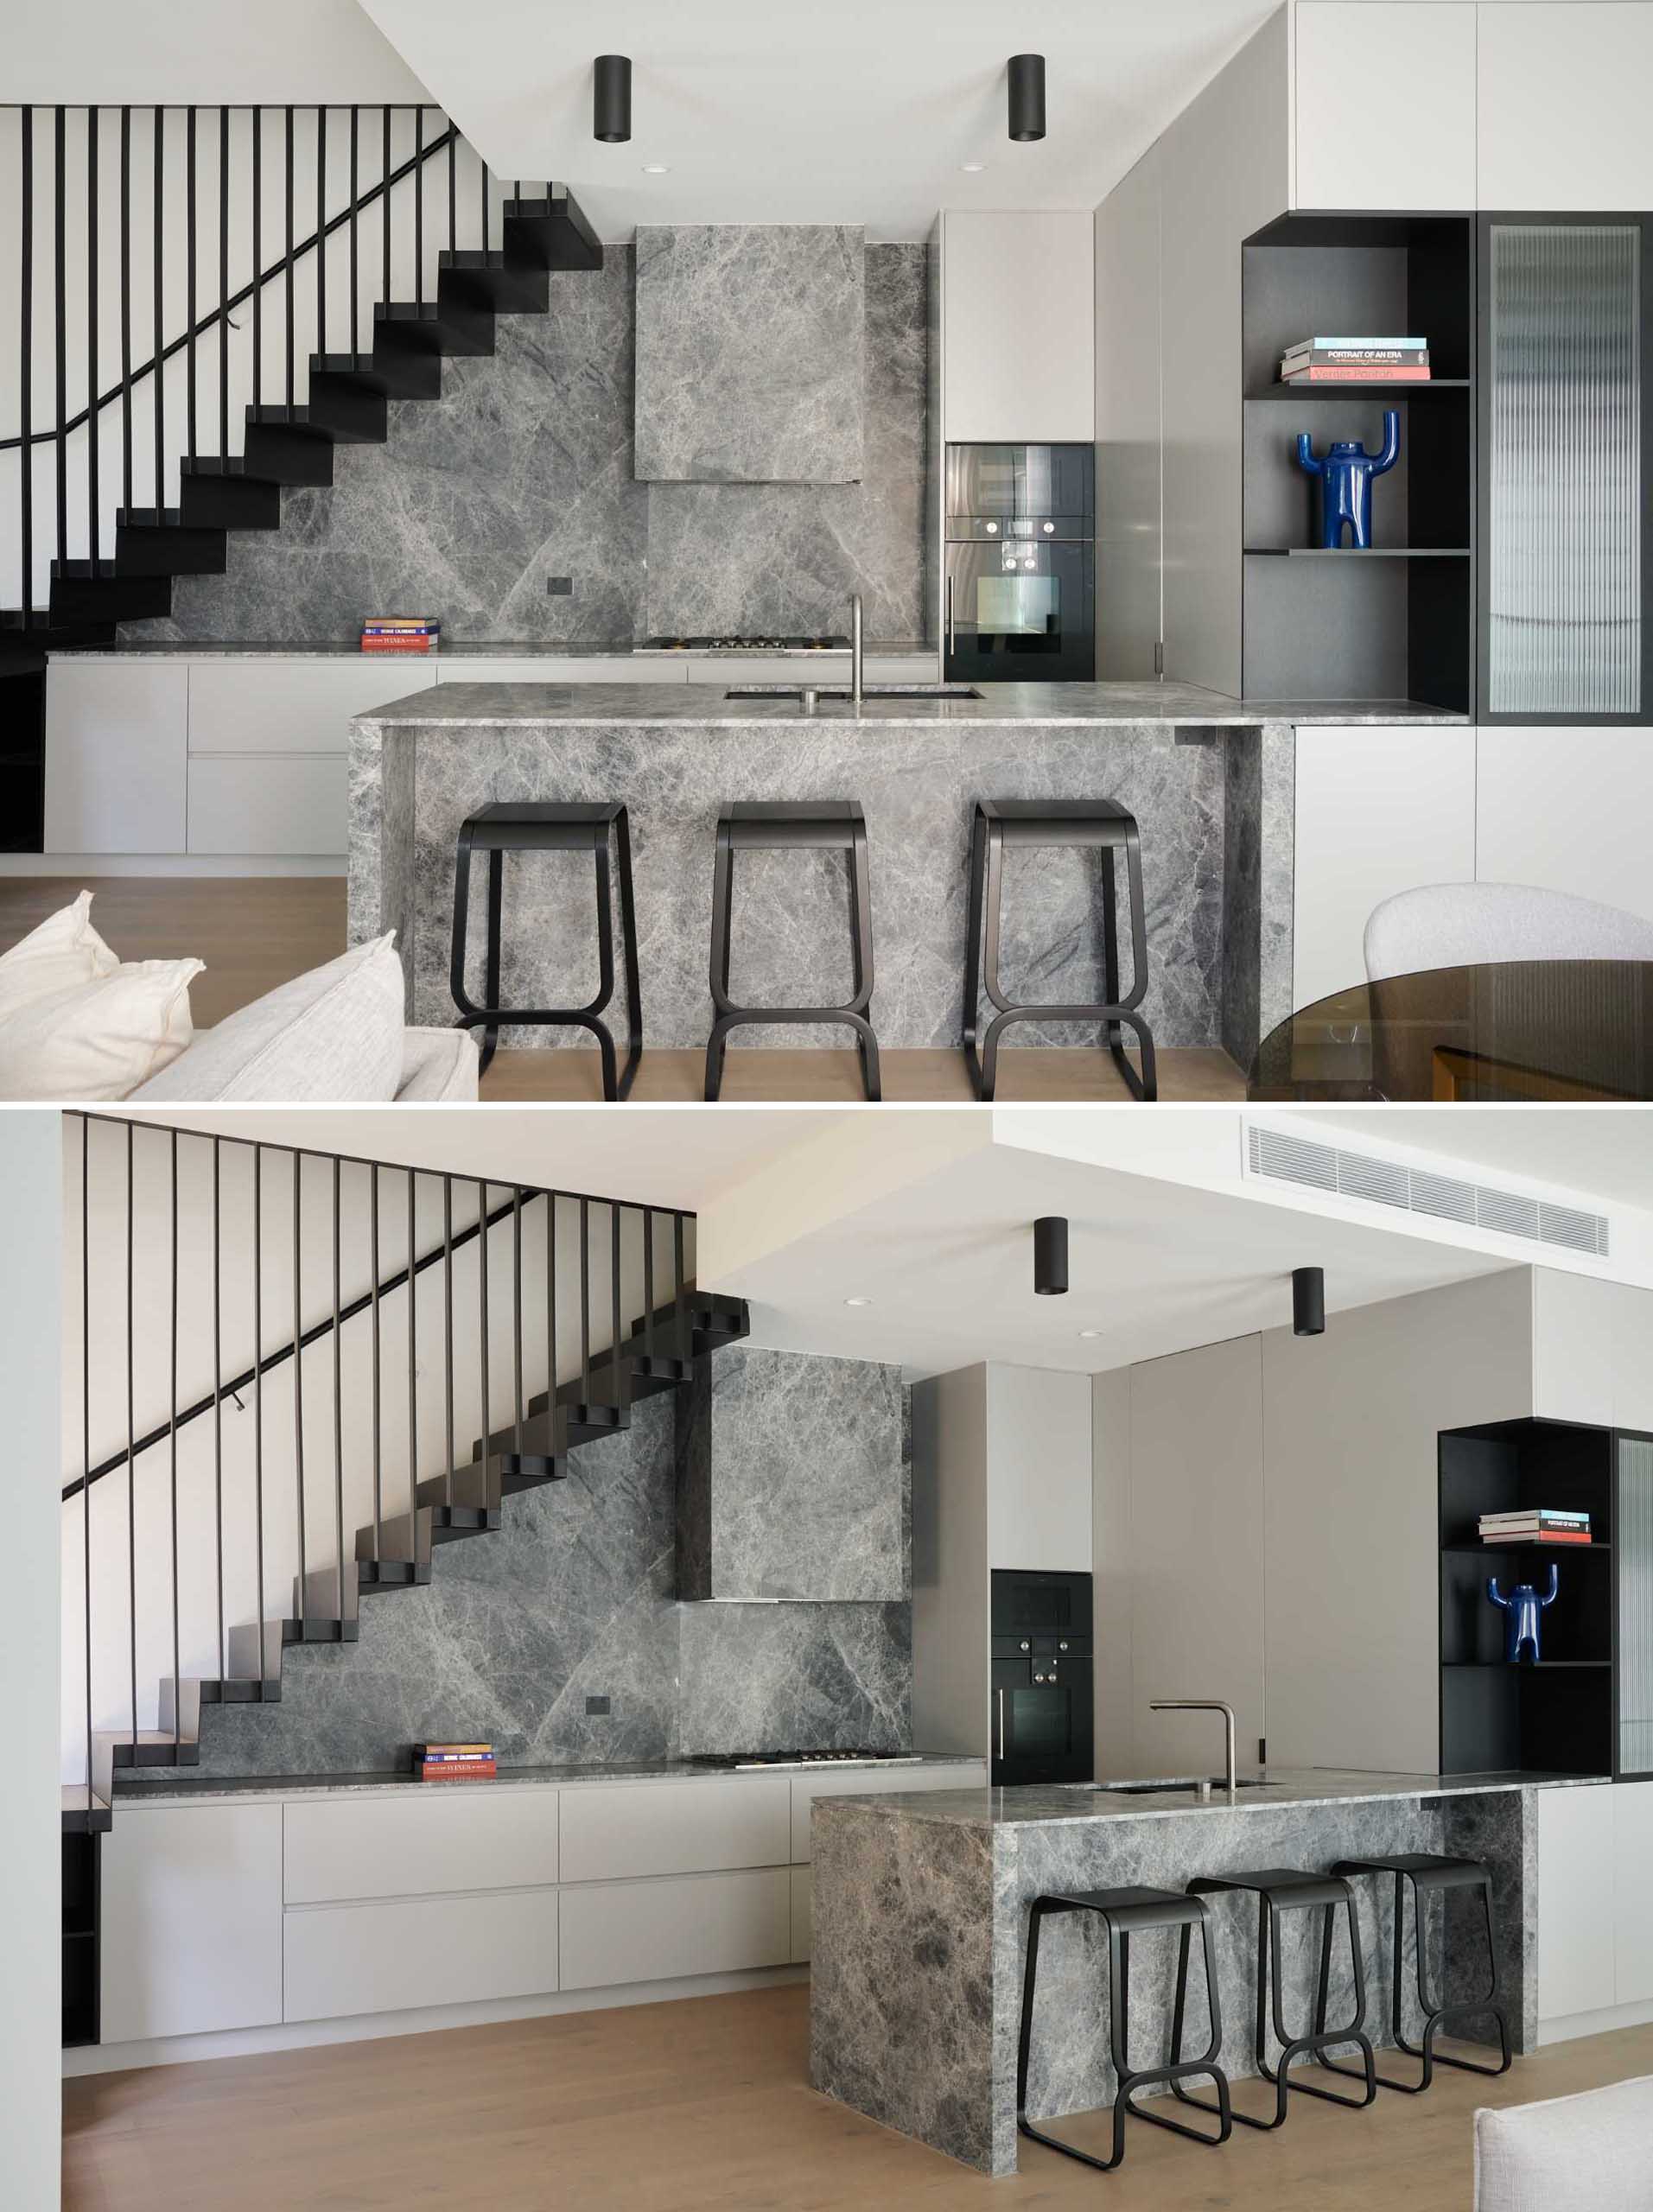 This modern kitchen, which is located underneath the stairs, and includes an island with counter seating, and minimalist hardware free cabinetry.